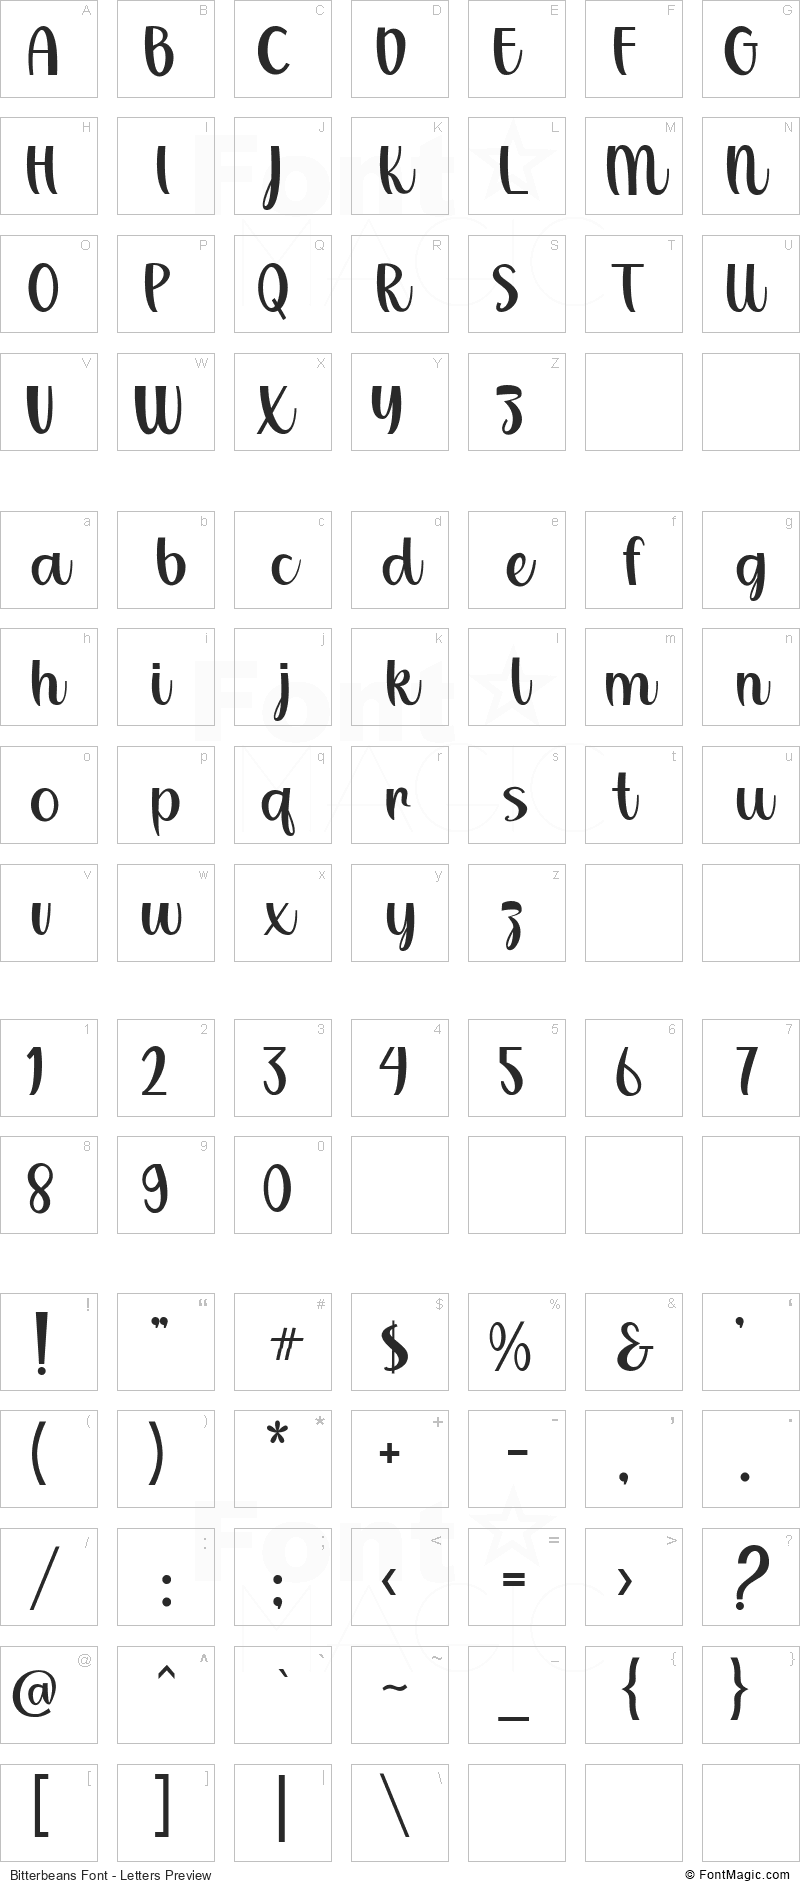 Bitterbeans Font - All Latters Preview Chart